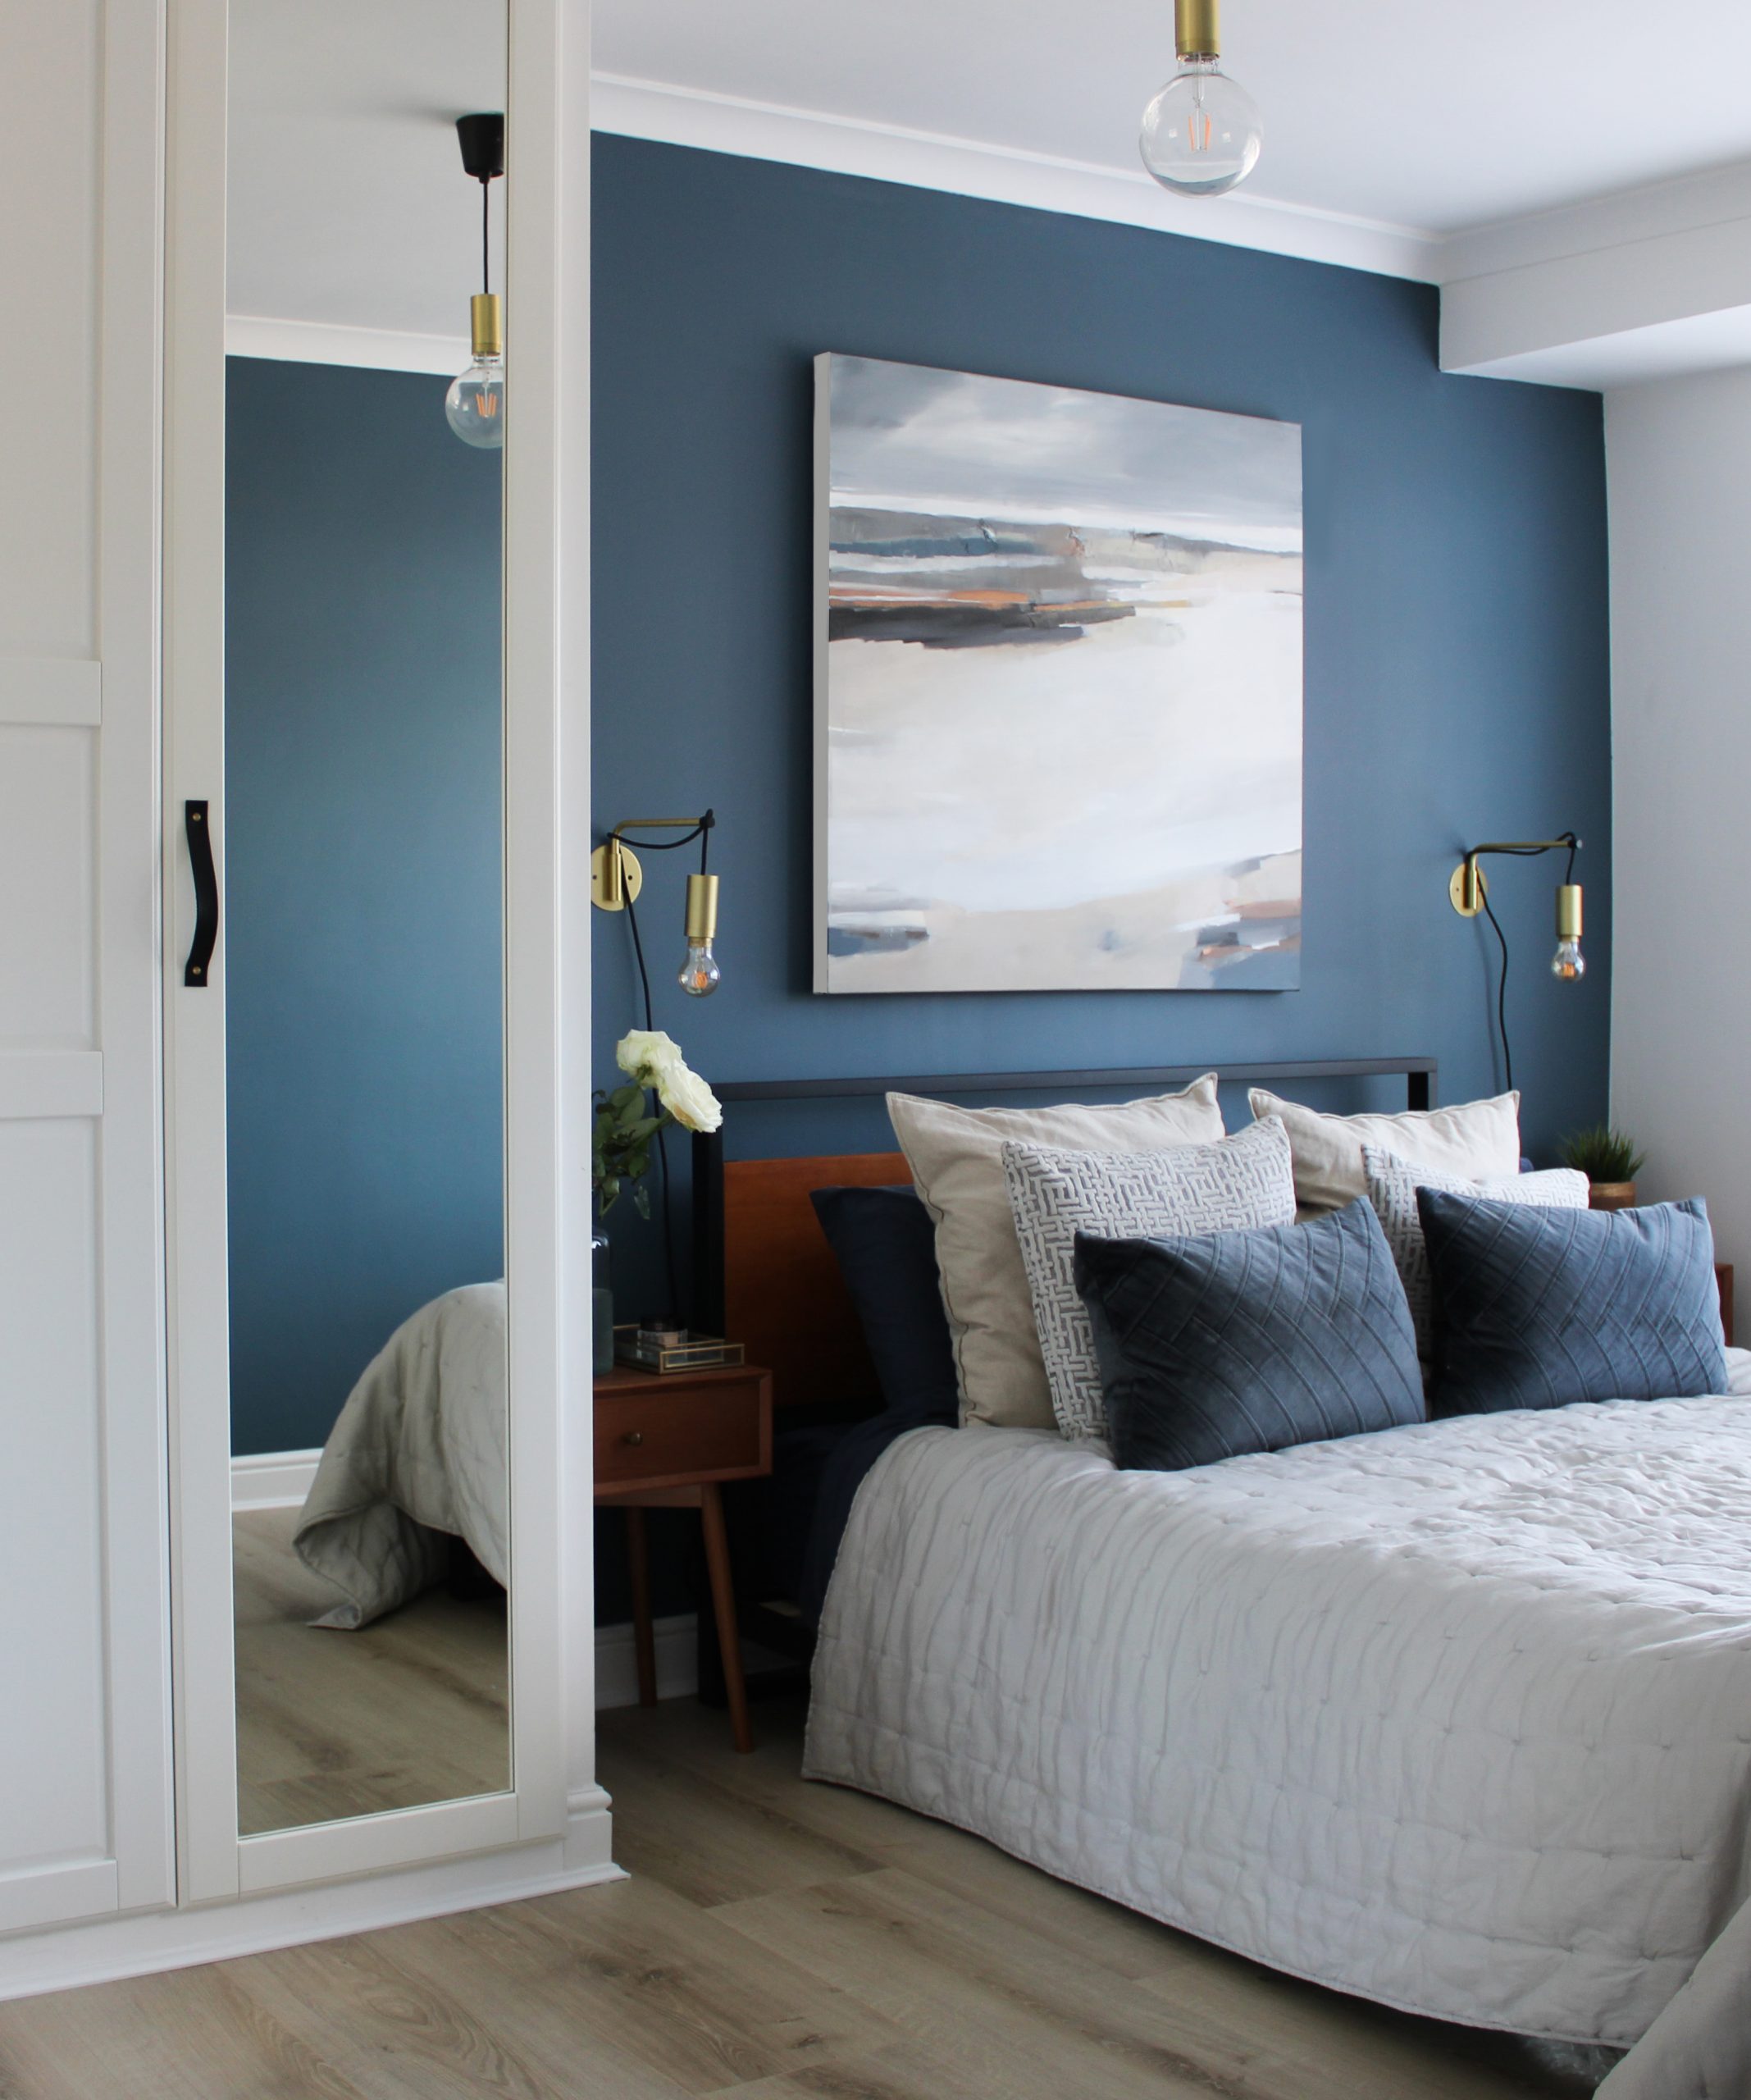 Christina Boyle Studio canvas hung above bed on blue wall